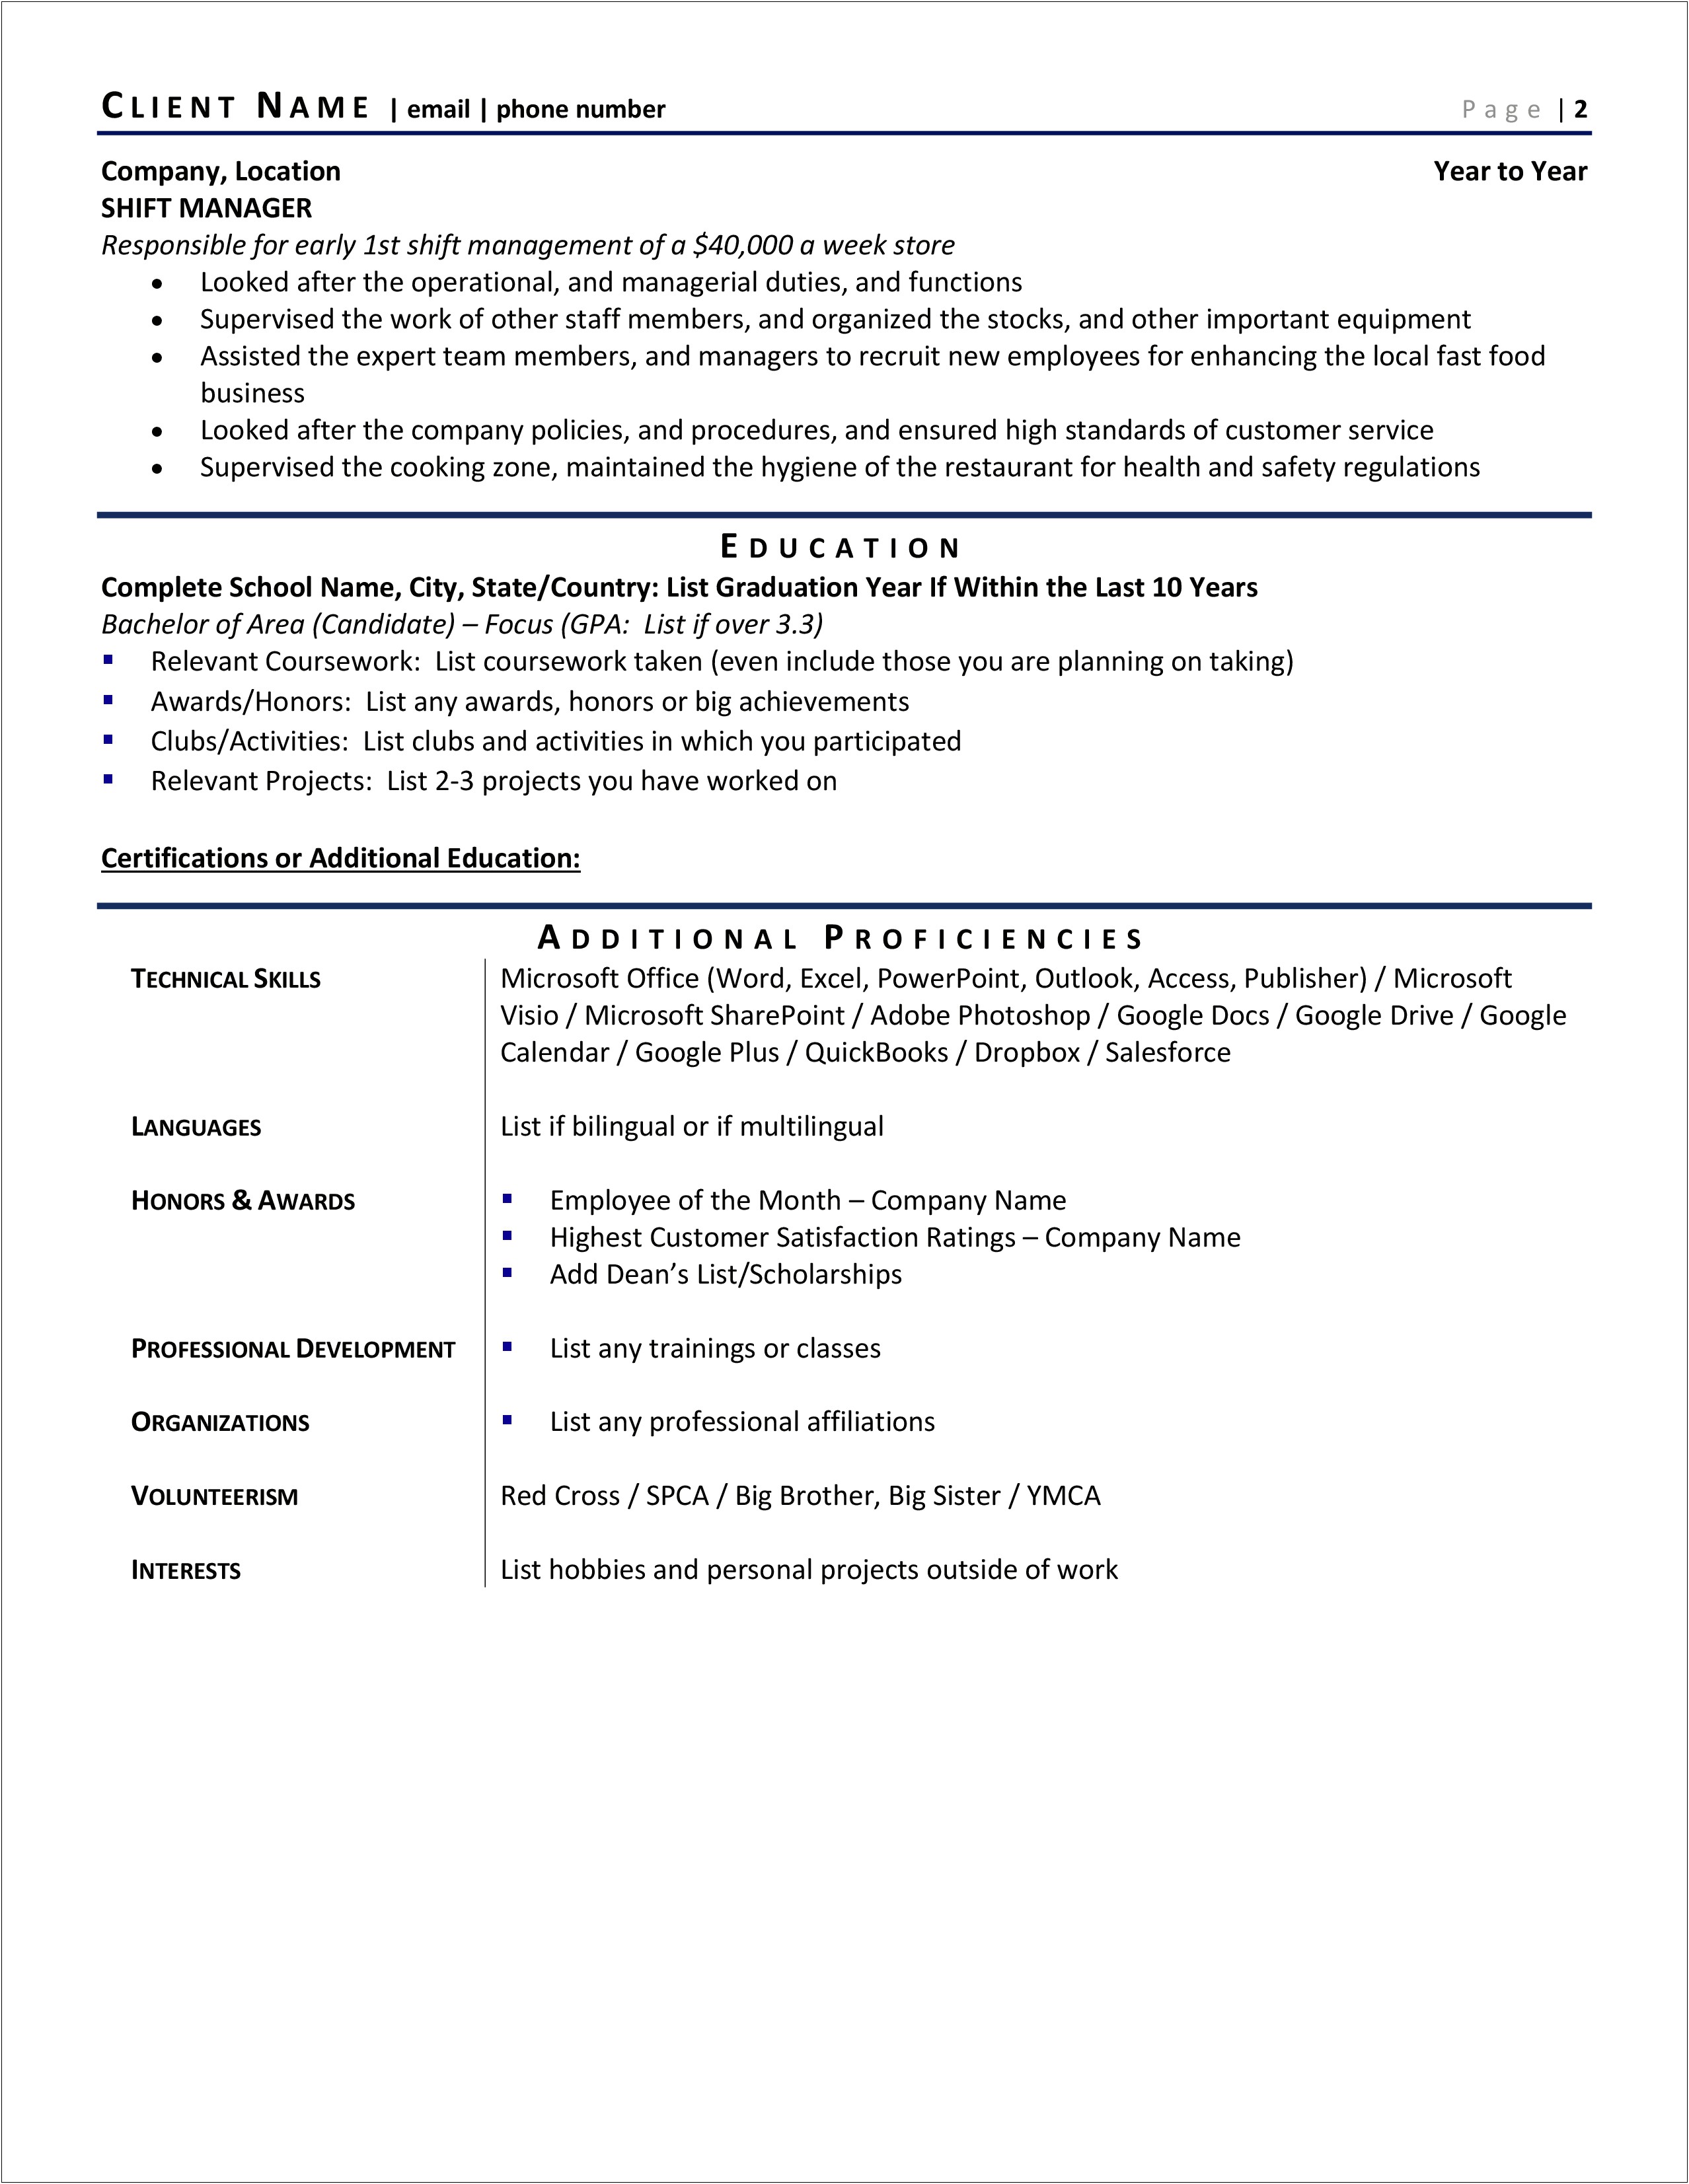 Another Way Of Listing Skills On Resume